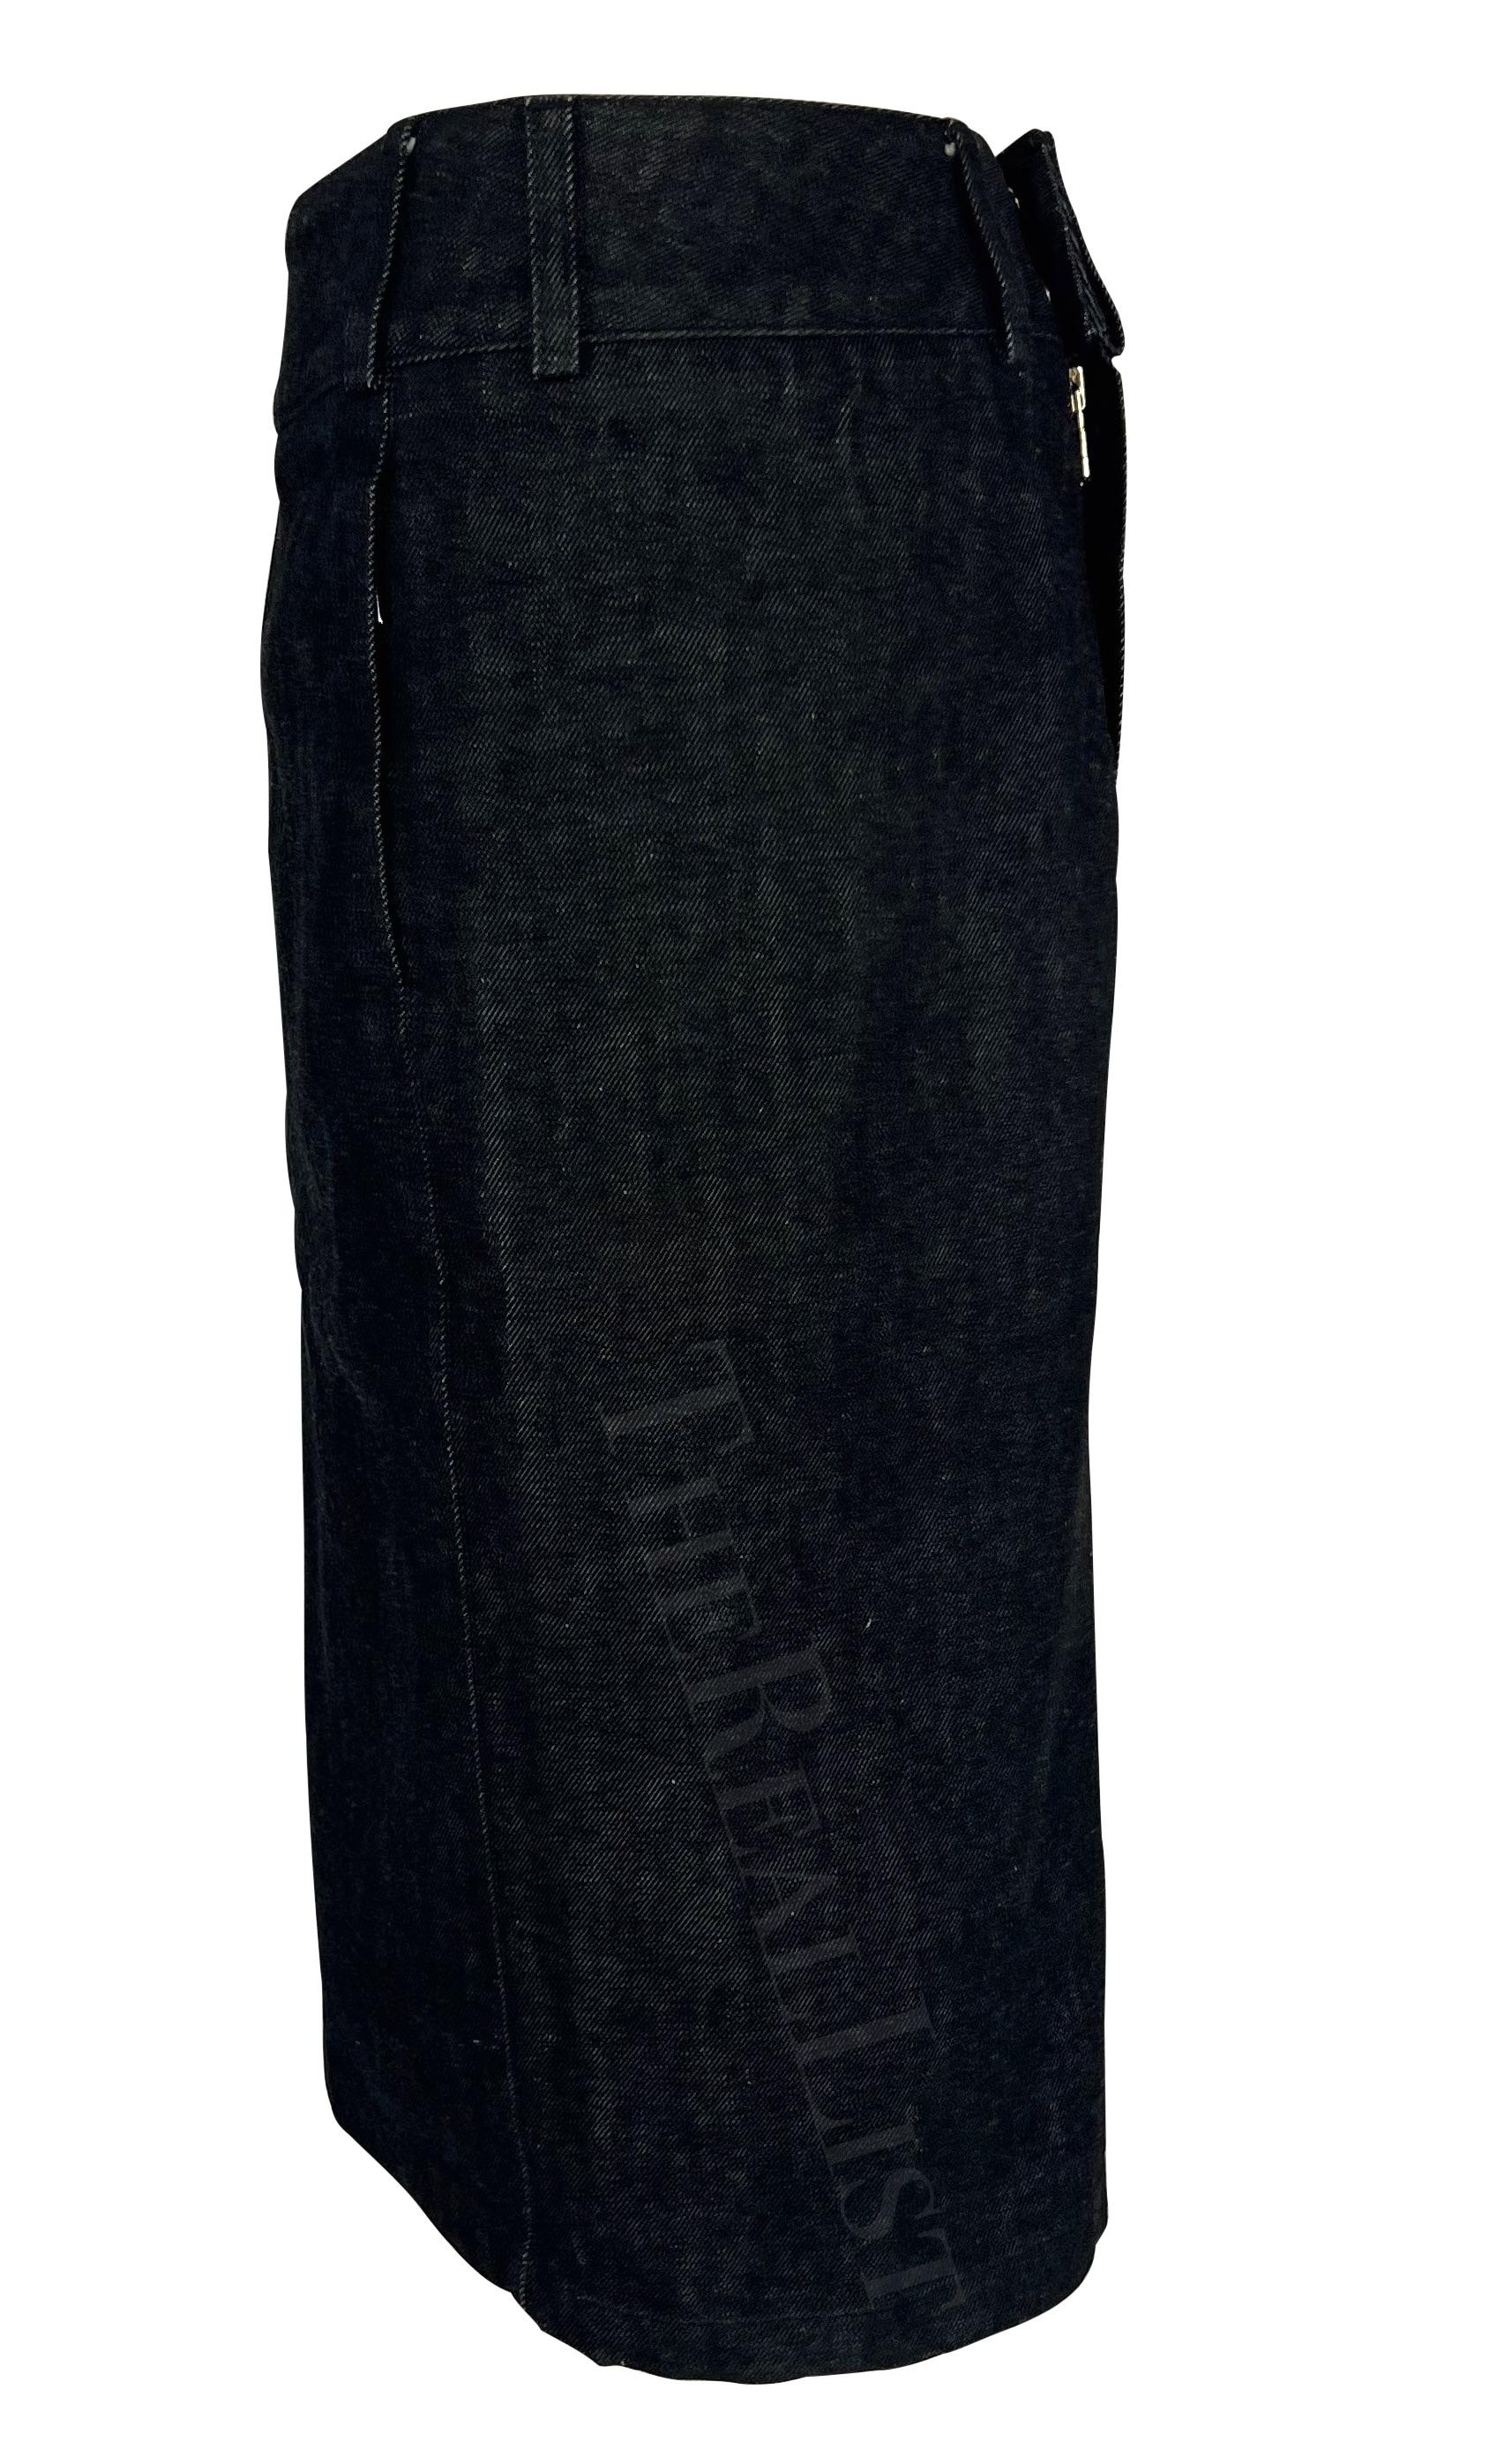 1999 Gucci by Tom Ford Dark Denim Zipper Skirt In Excellent Condition For Sale In West Hollywood, CA